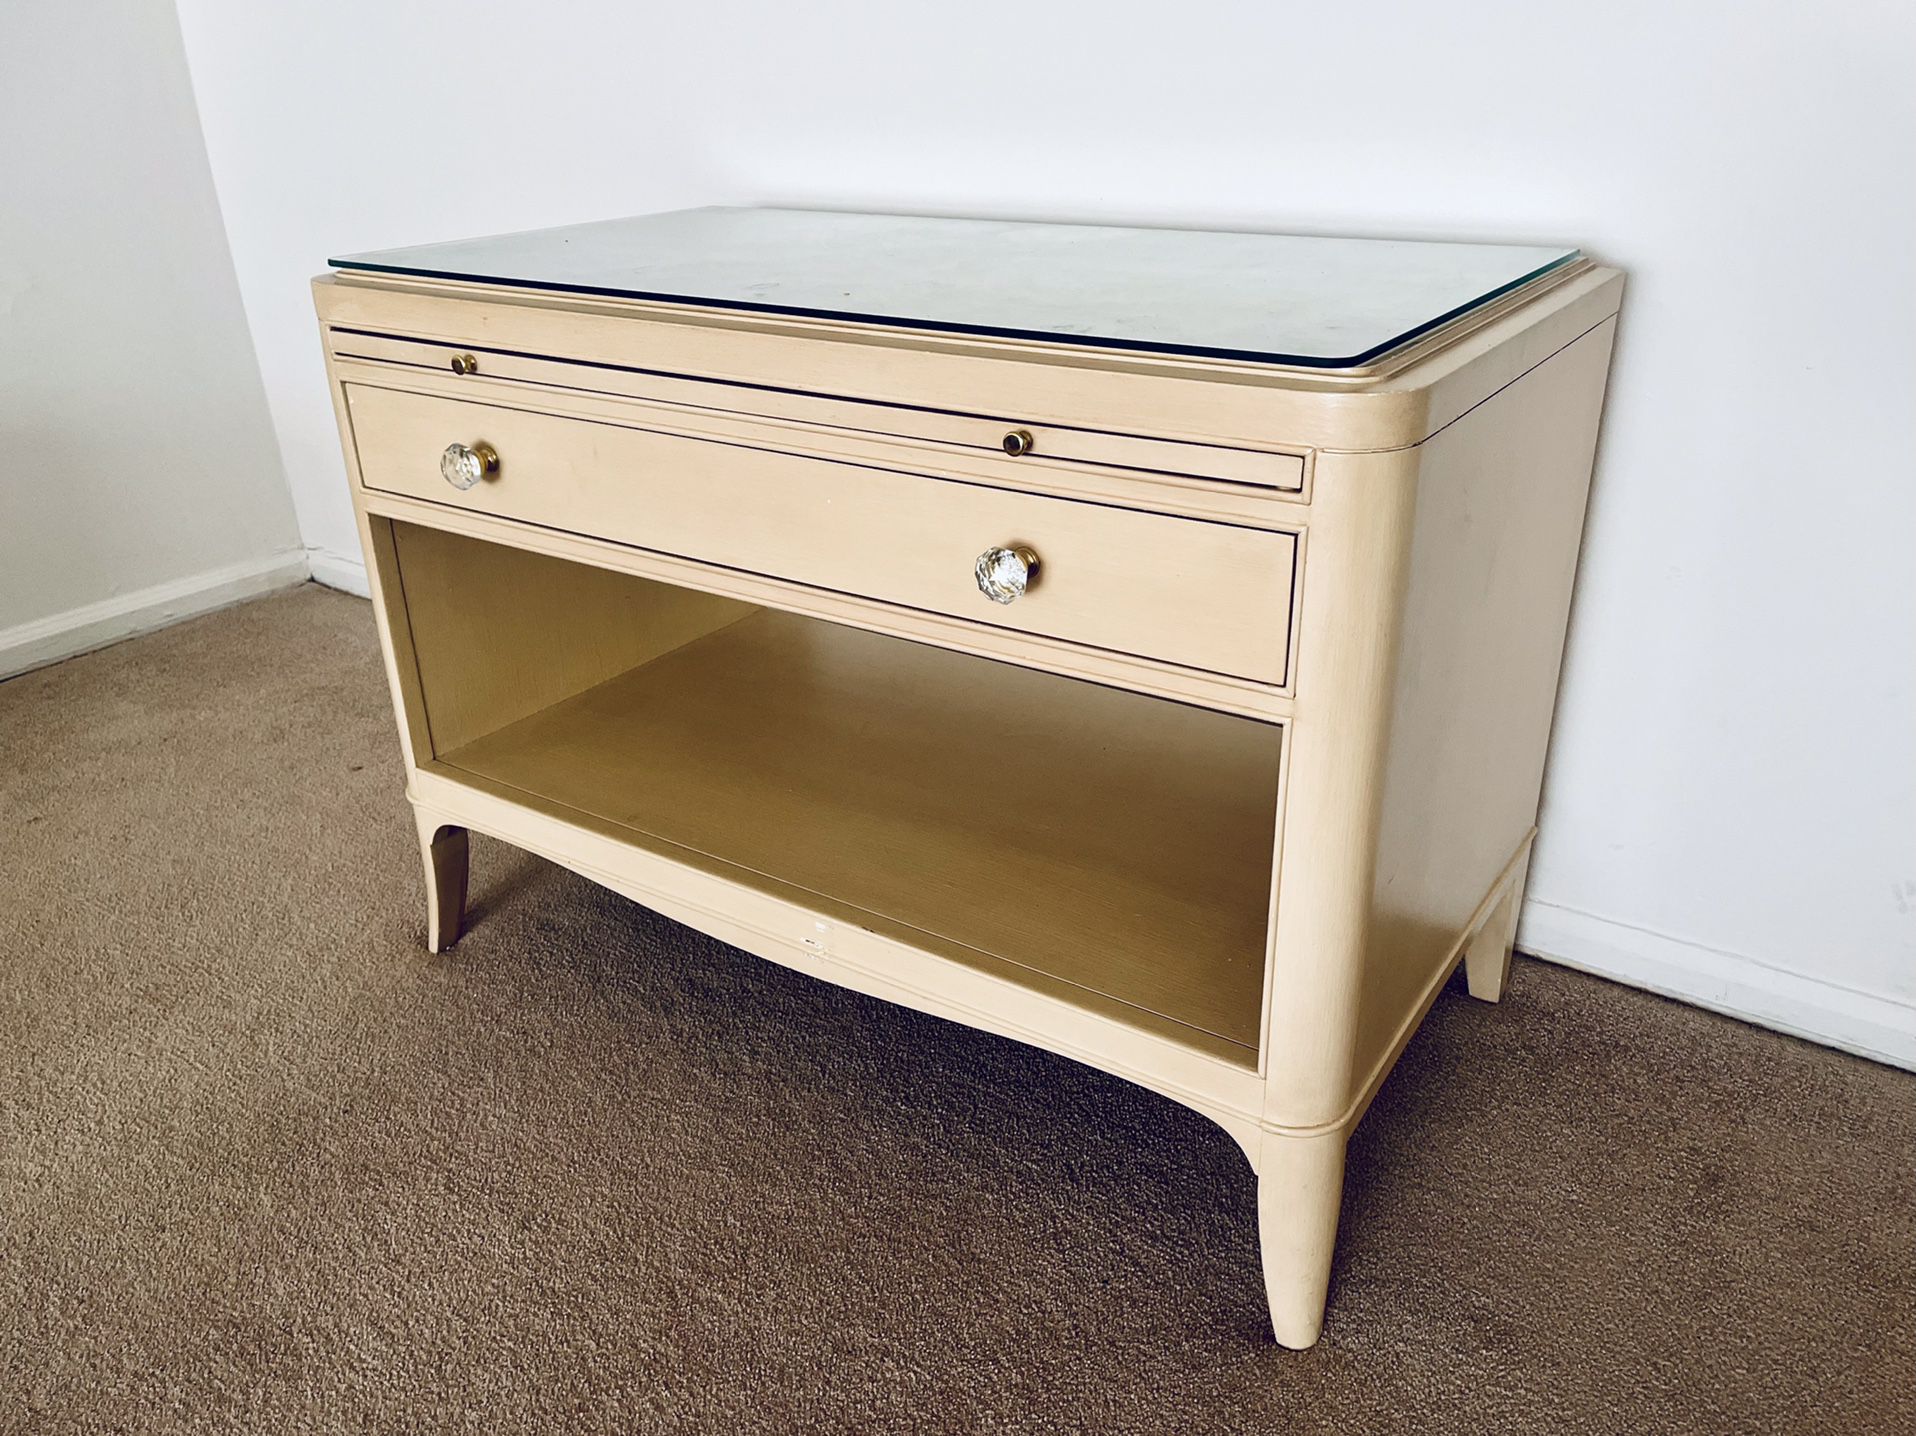 Vanity Table (The Barbara Barry Collection by Baker)